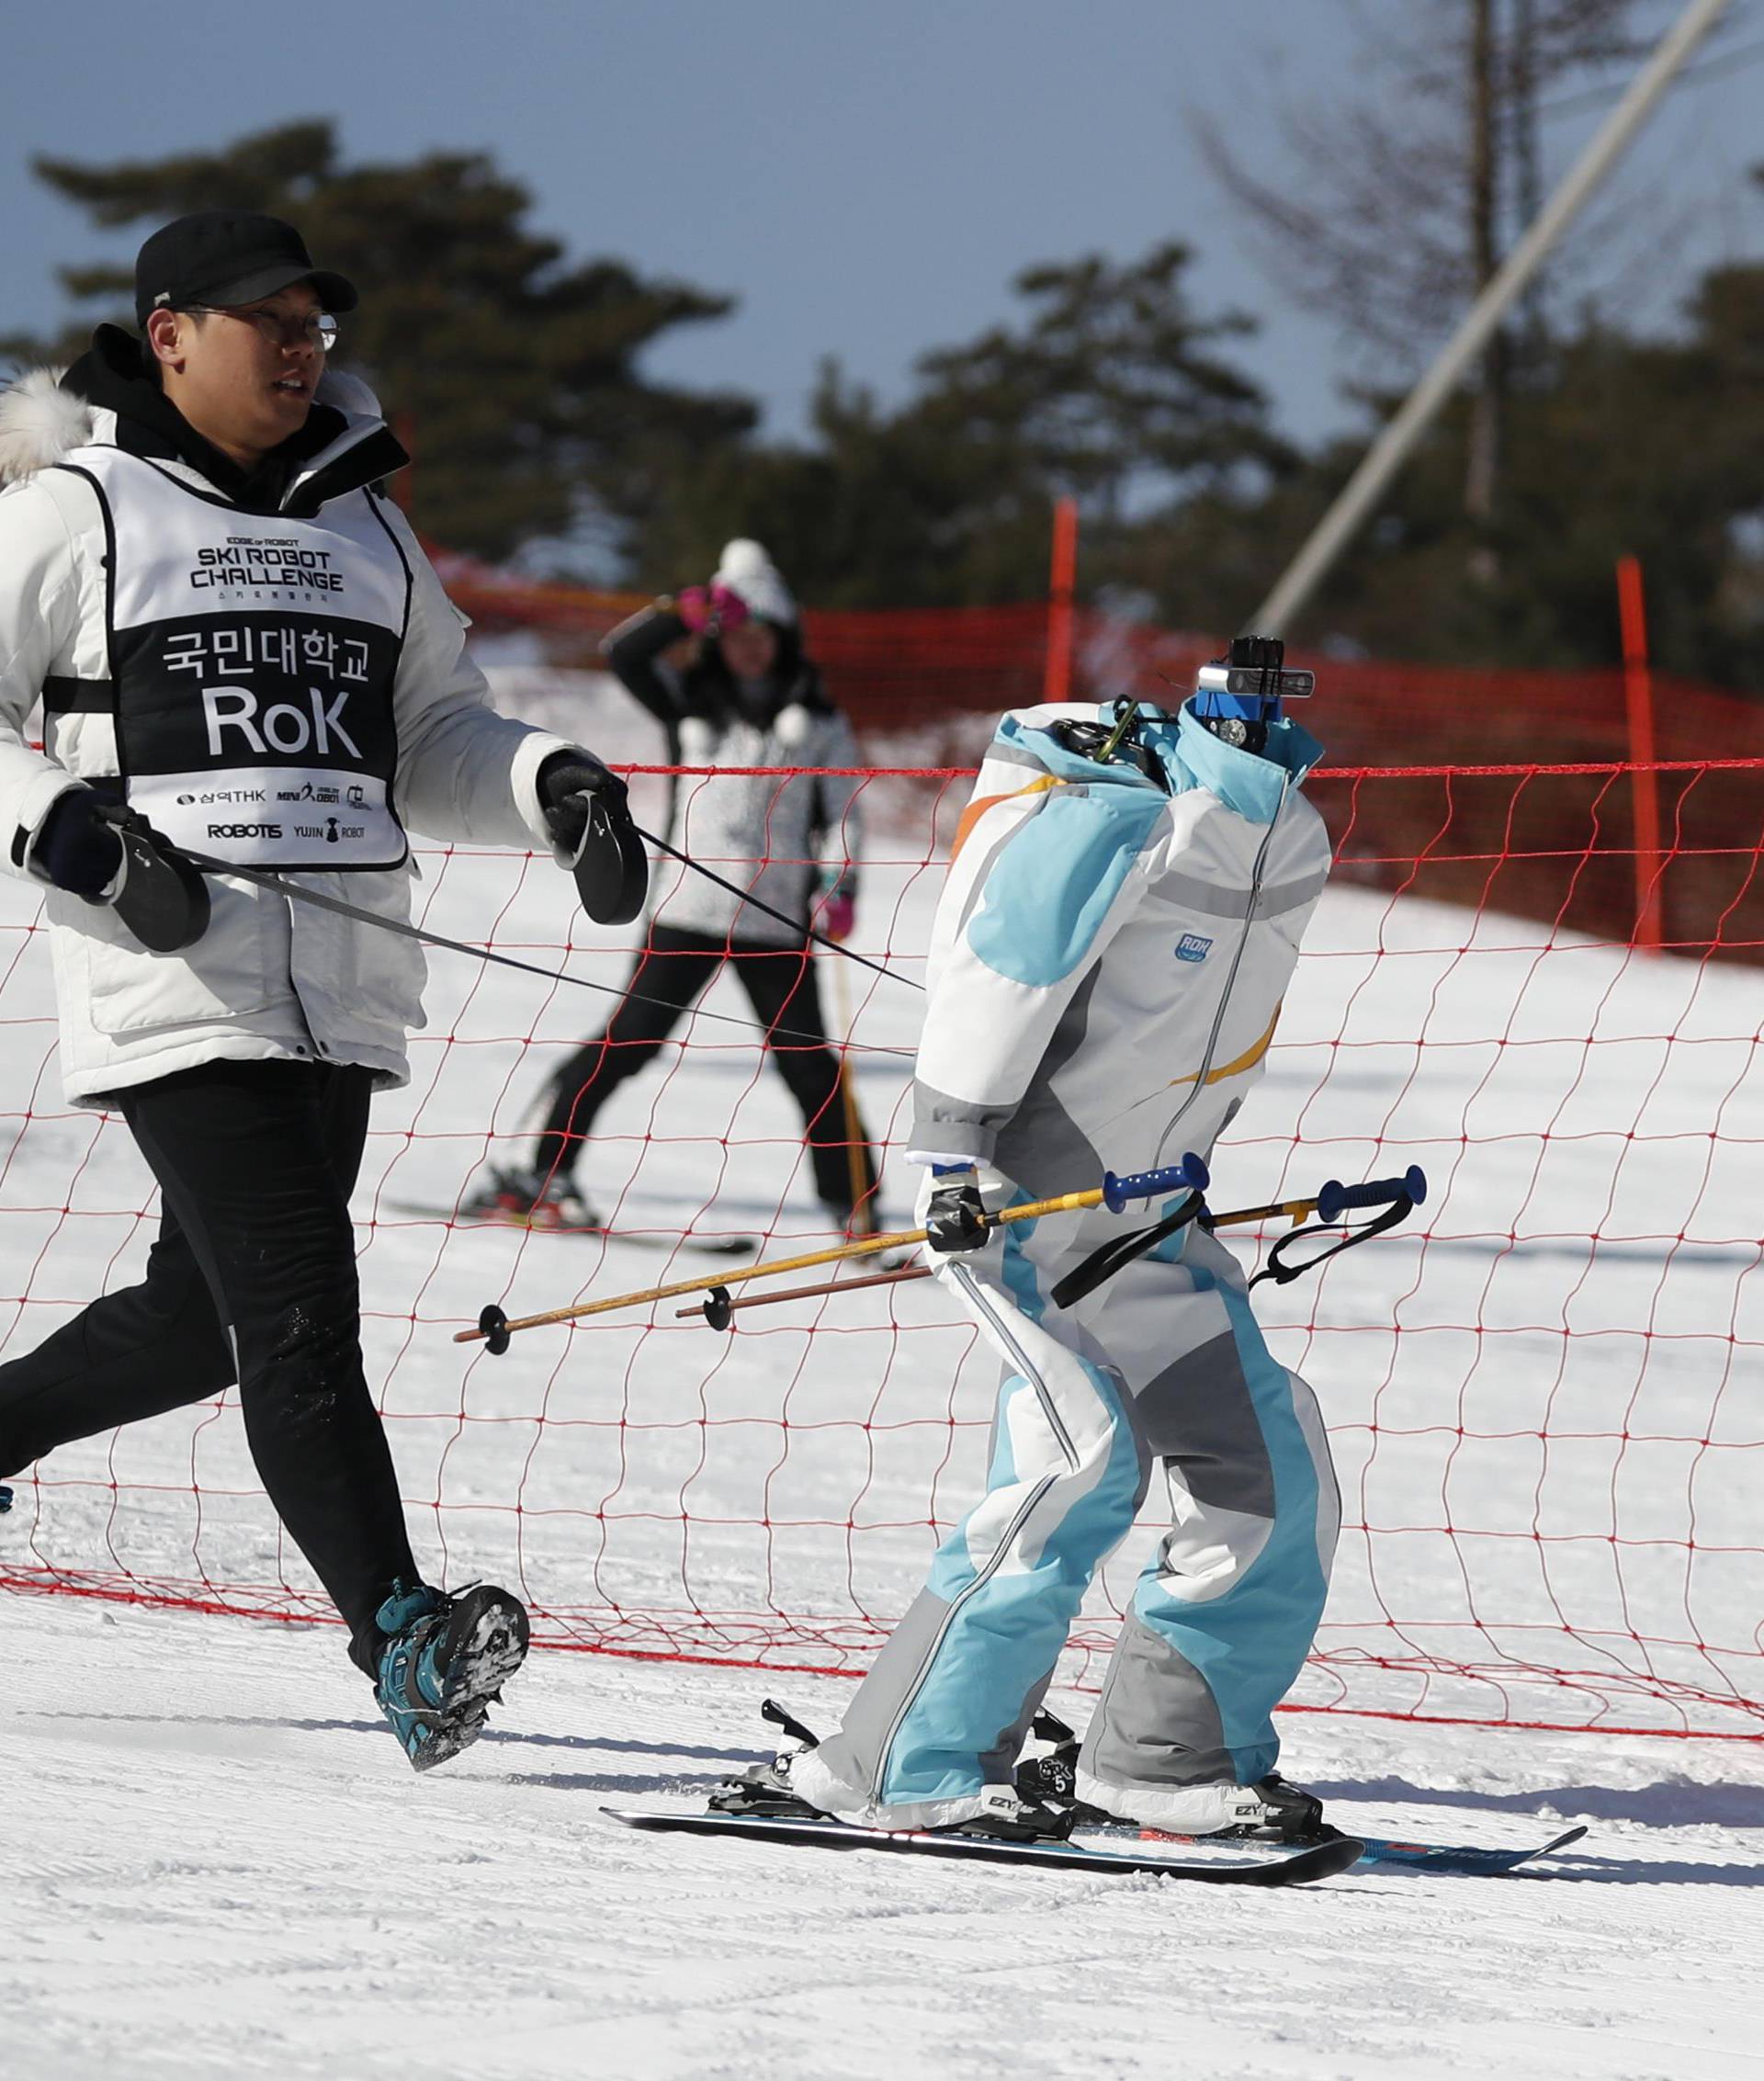 A robot skis during practice at the Ski Robot Challenge at a ski resort in Hoenseong